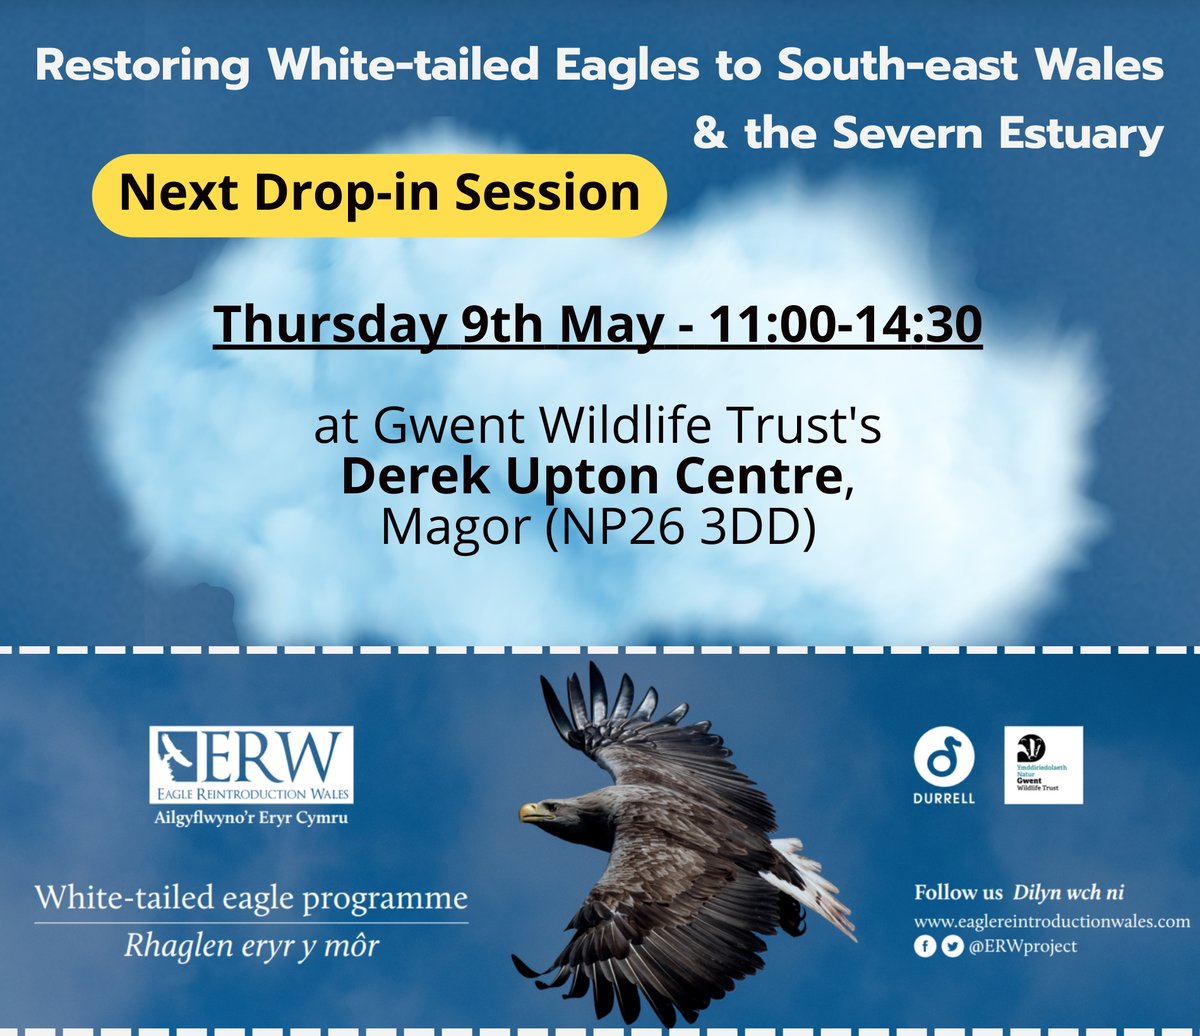 Want to learn more about the return of White-tailed Eagles to South-east Wales and the Severn Estuary? Now’s your chance! @ERWproject are hosting their first drop-in session at @GwentWildlife's Magor Marsh on May 9. Go along to say hi, show your support and express your views.